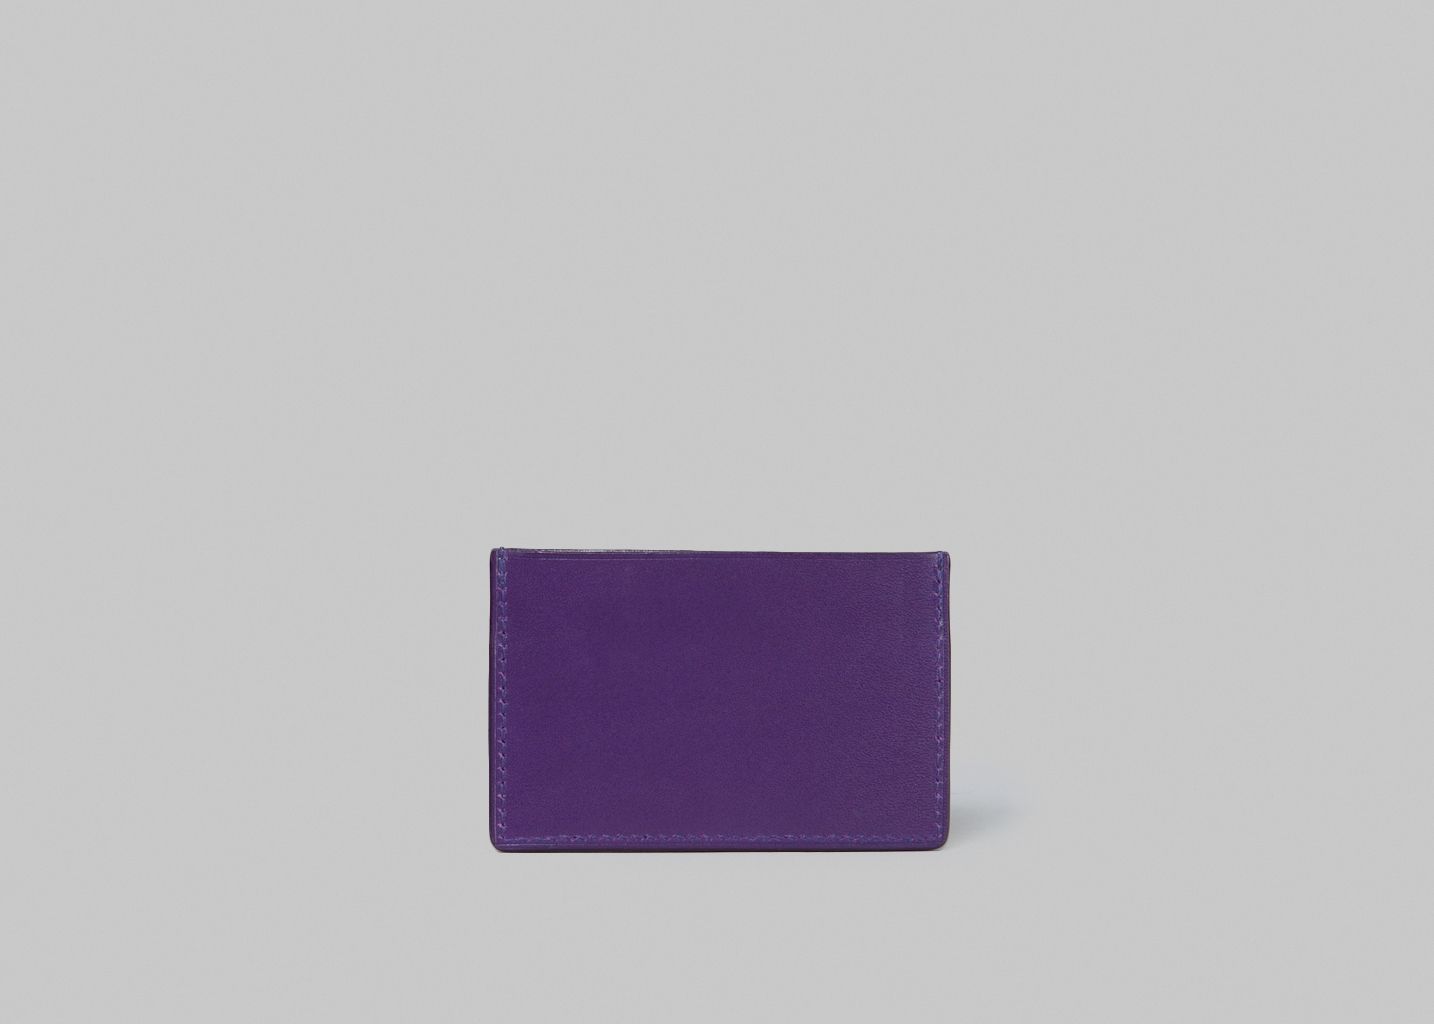 Card Holder - The Faraday Project